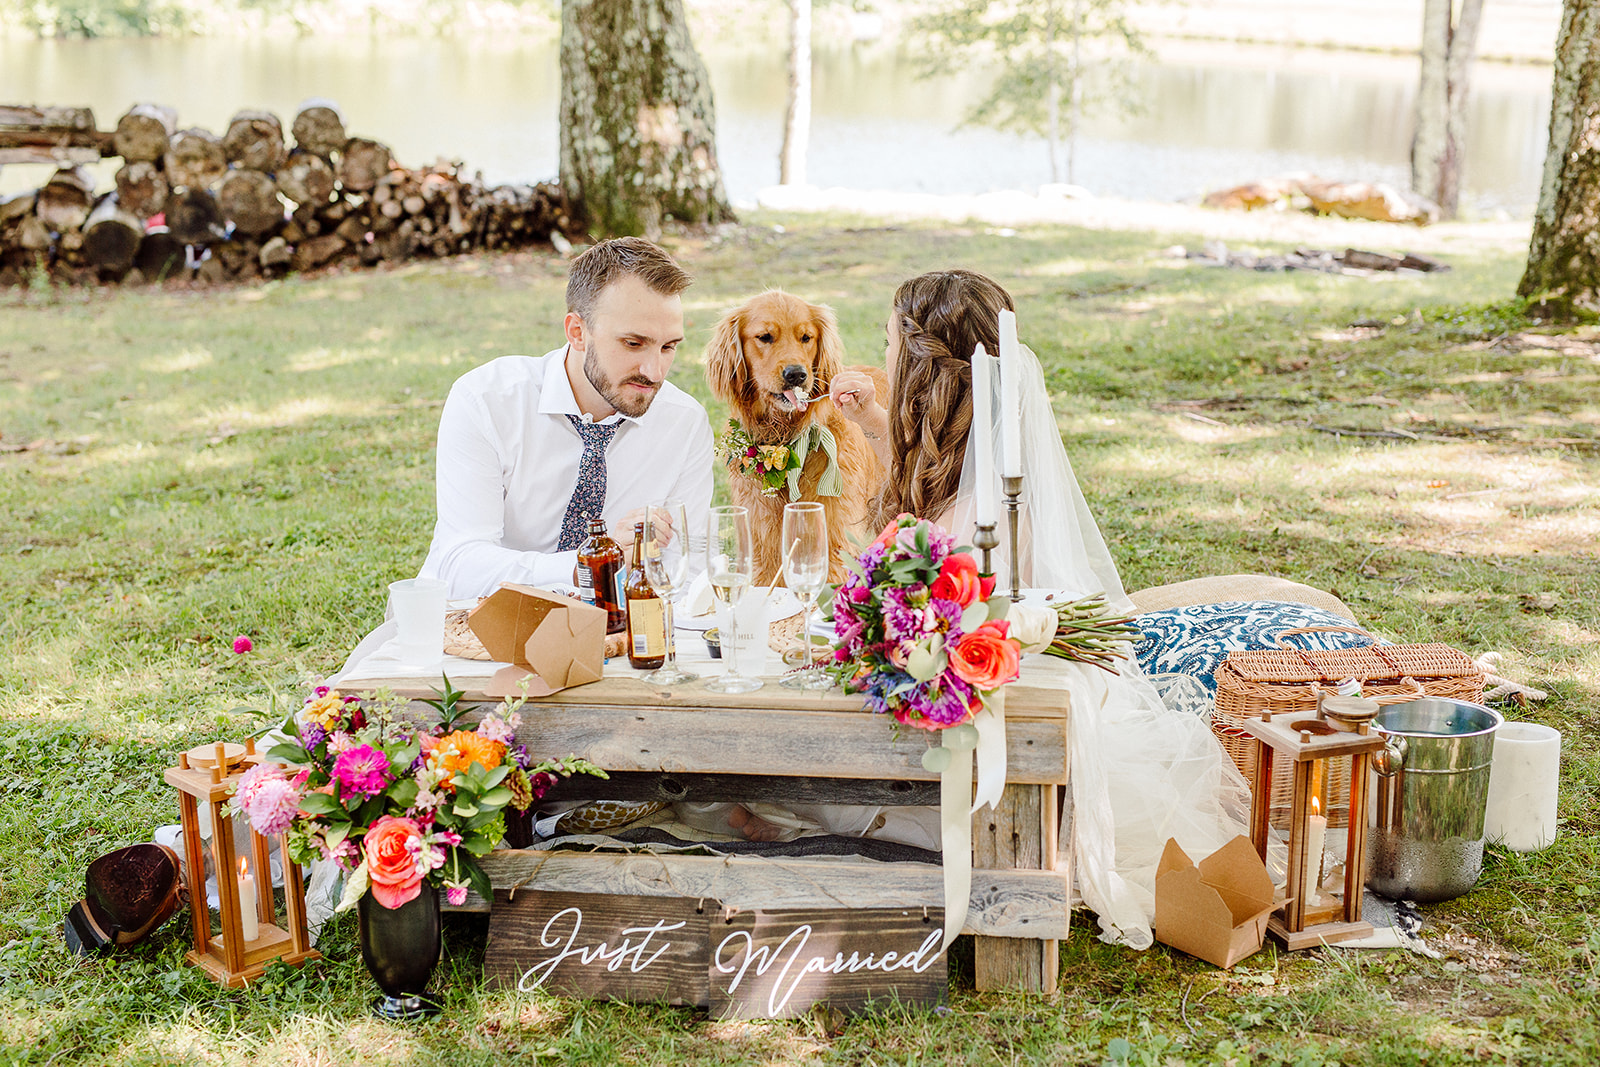 Image Of A Picnic Inspired Edson Hill Wedding With A Golden Retriever